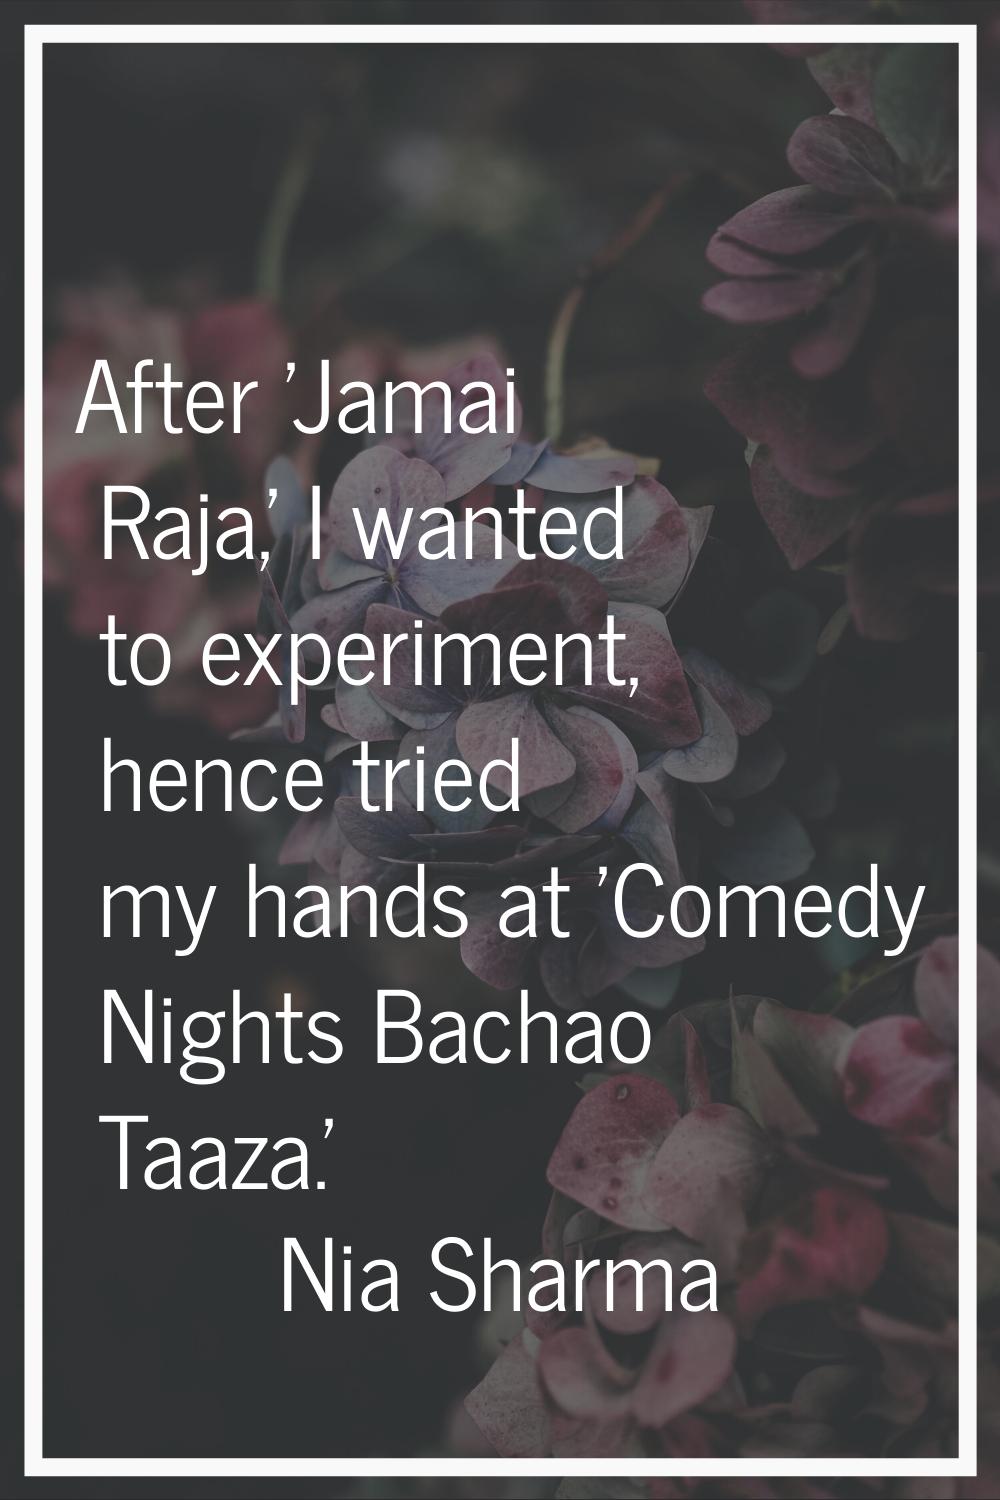 After 'Jamai Raja,' I wanted to experiment, hence tried my hands at 'Comedy Nights Bachao Taaza.'